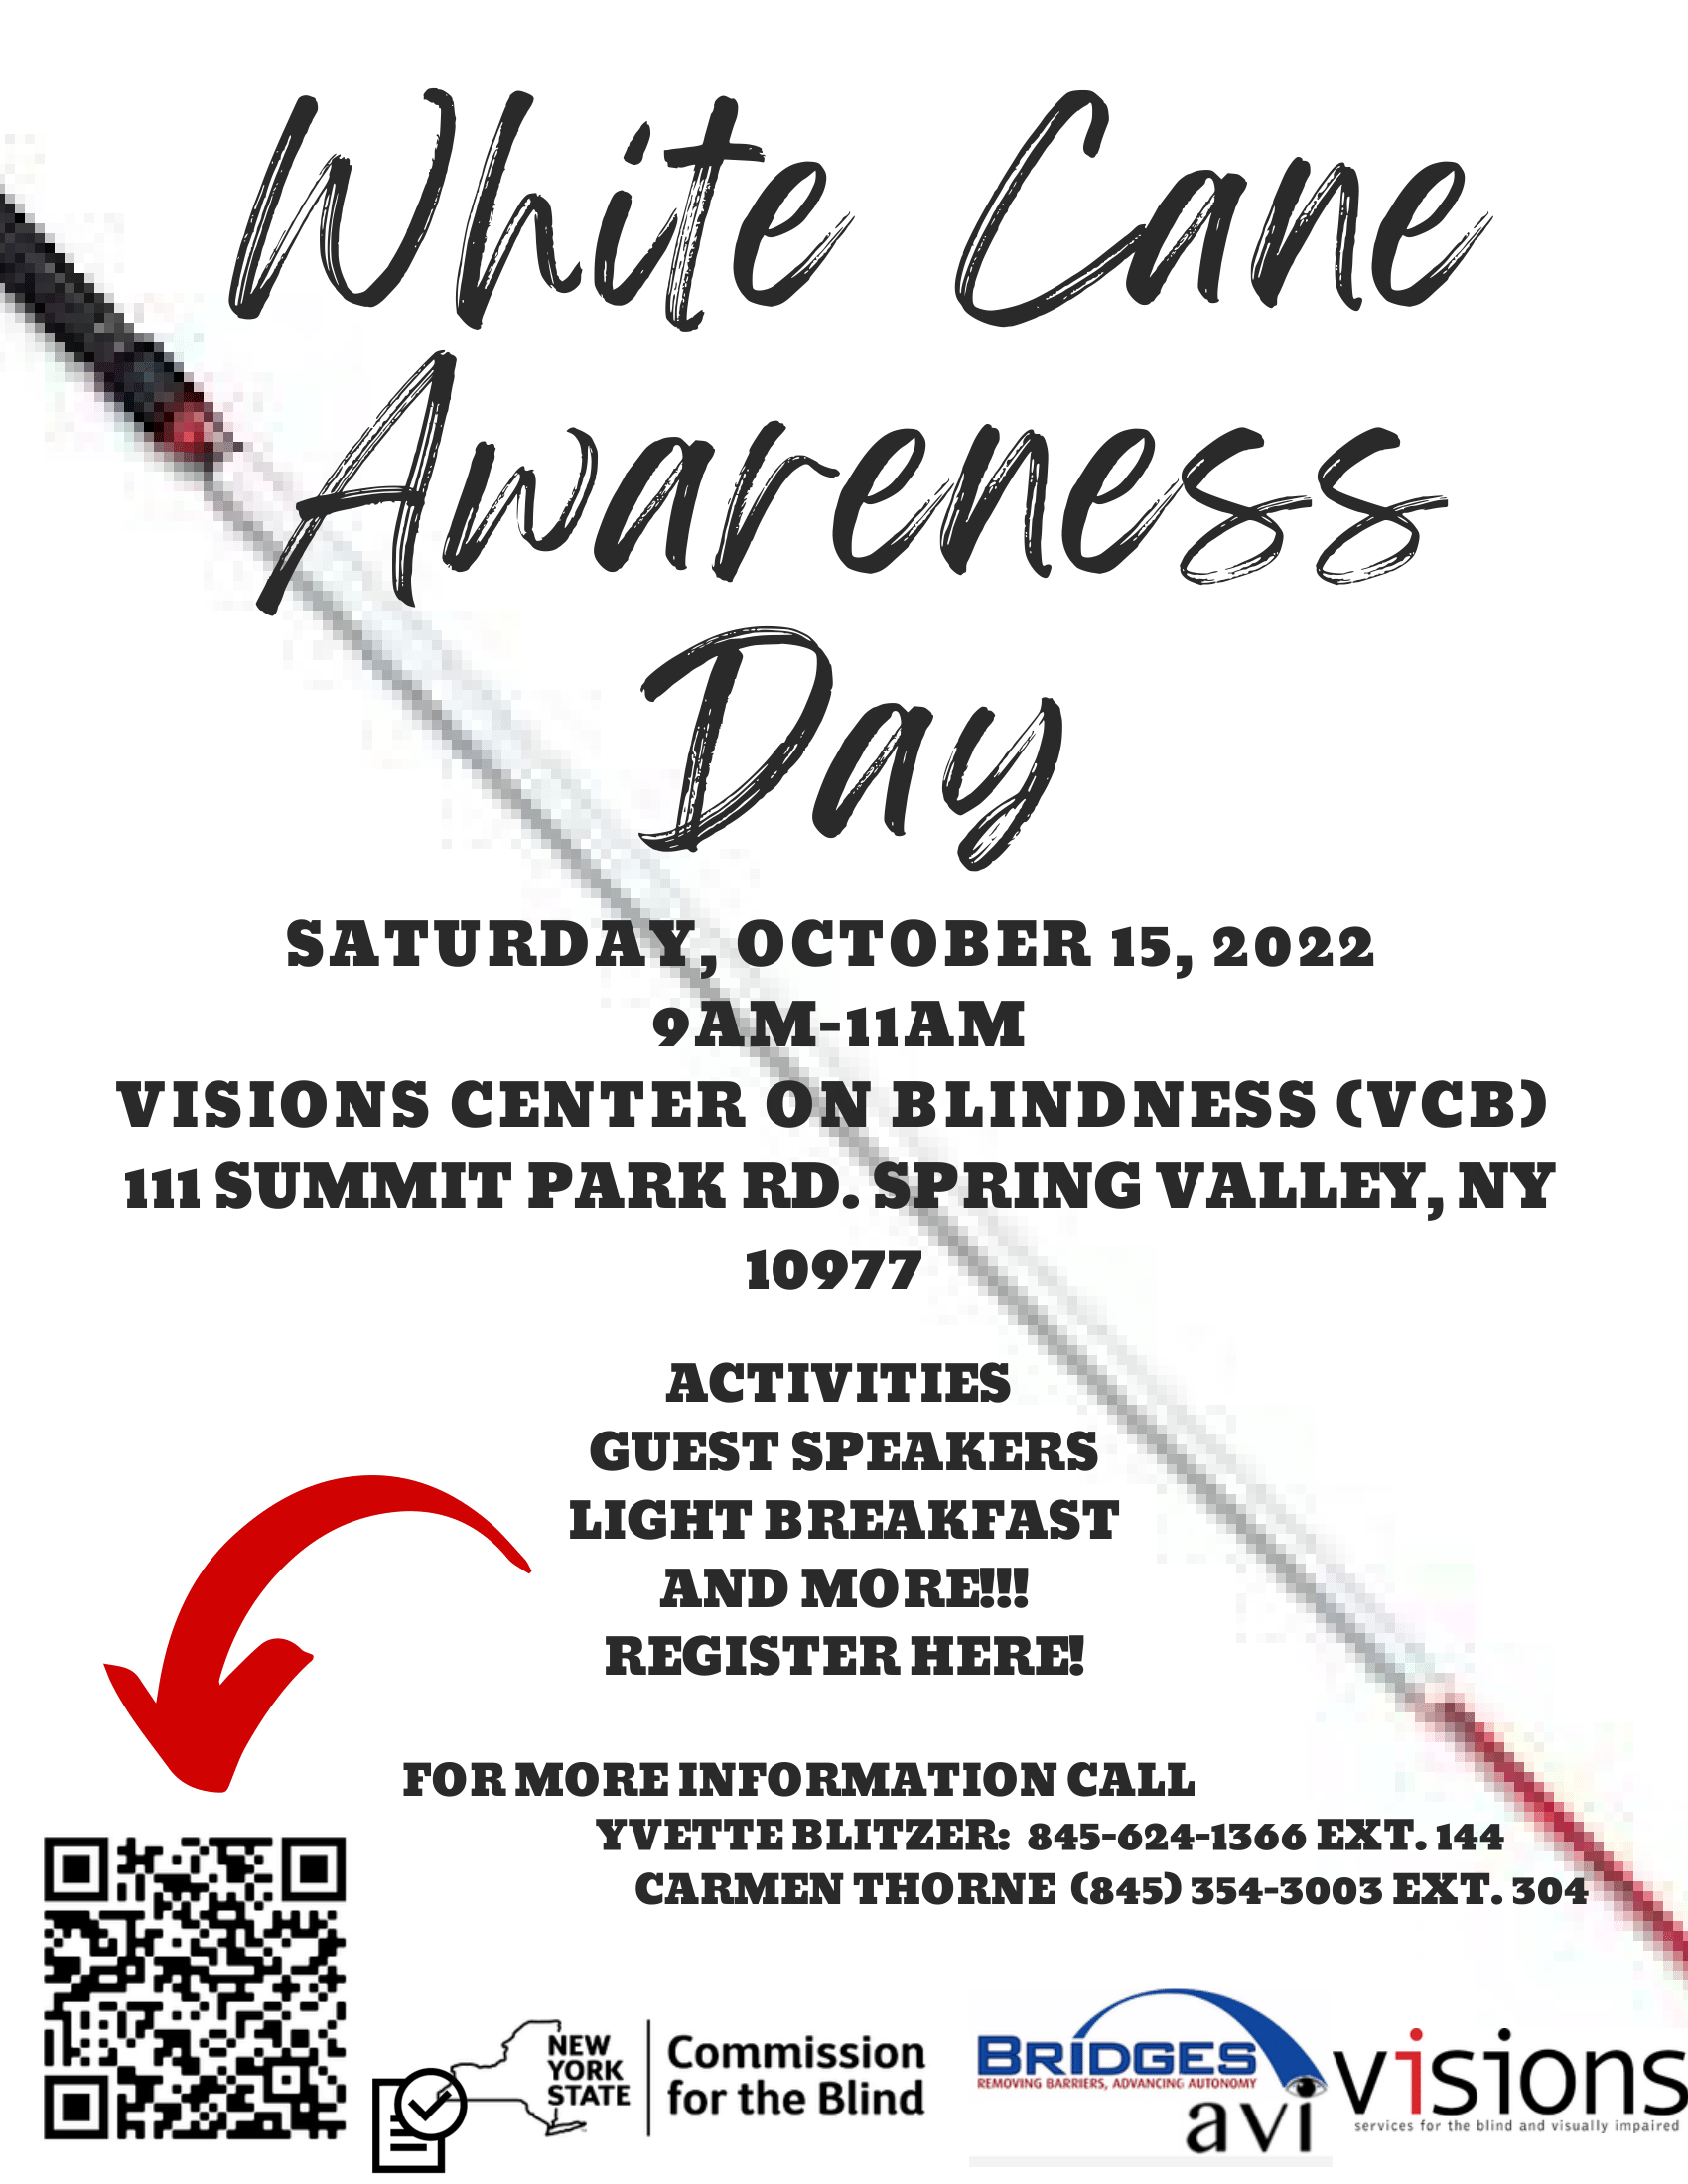 White Cane Awareness Day. Saturday, October 15, 2022, 9 am to 11 am. Visions Center on Blindness (V.C.B.), 111 Summit Park Road, Spring Valley, NY 10977. Activities, guest speakers, light breakfast, and more! Register here. For more information call Yvette Blitzer 845-624-1366 Ext 144 and Carmen Thorne. 845-354-3003 Ext 304.